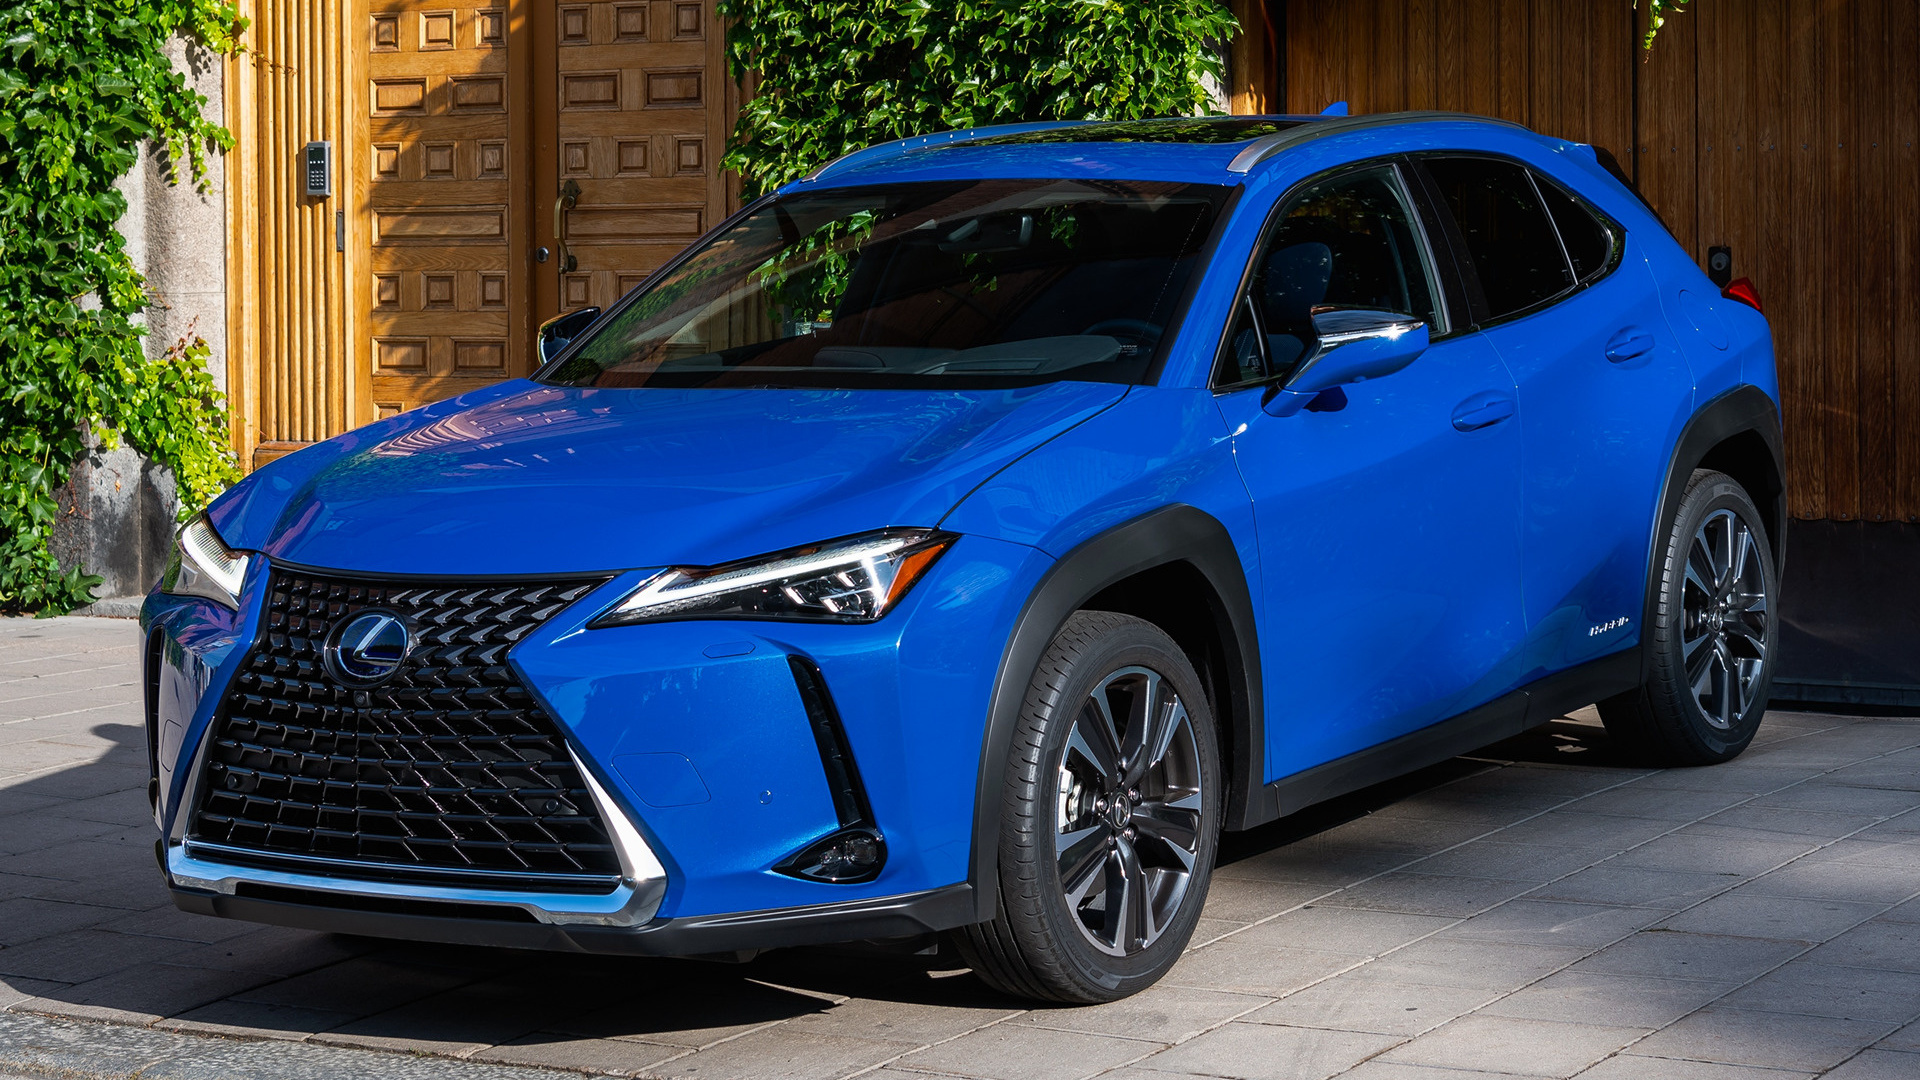 2019 Lexus UX Hybrid (US) - Wallpapers and HD Images | Car Pixel